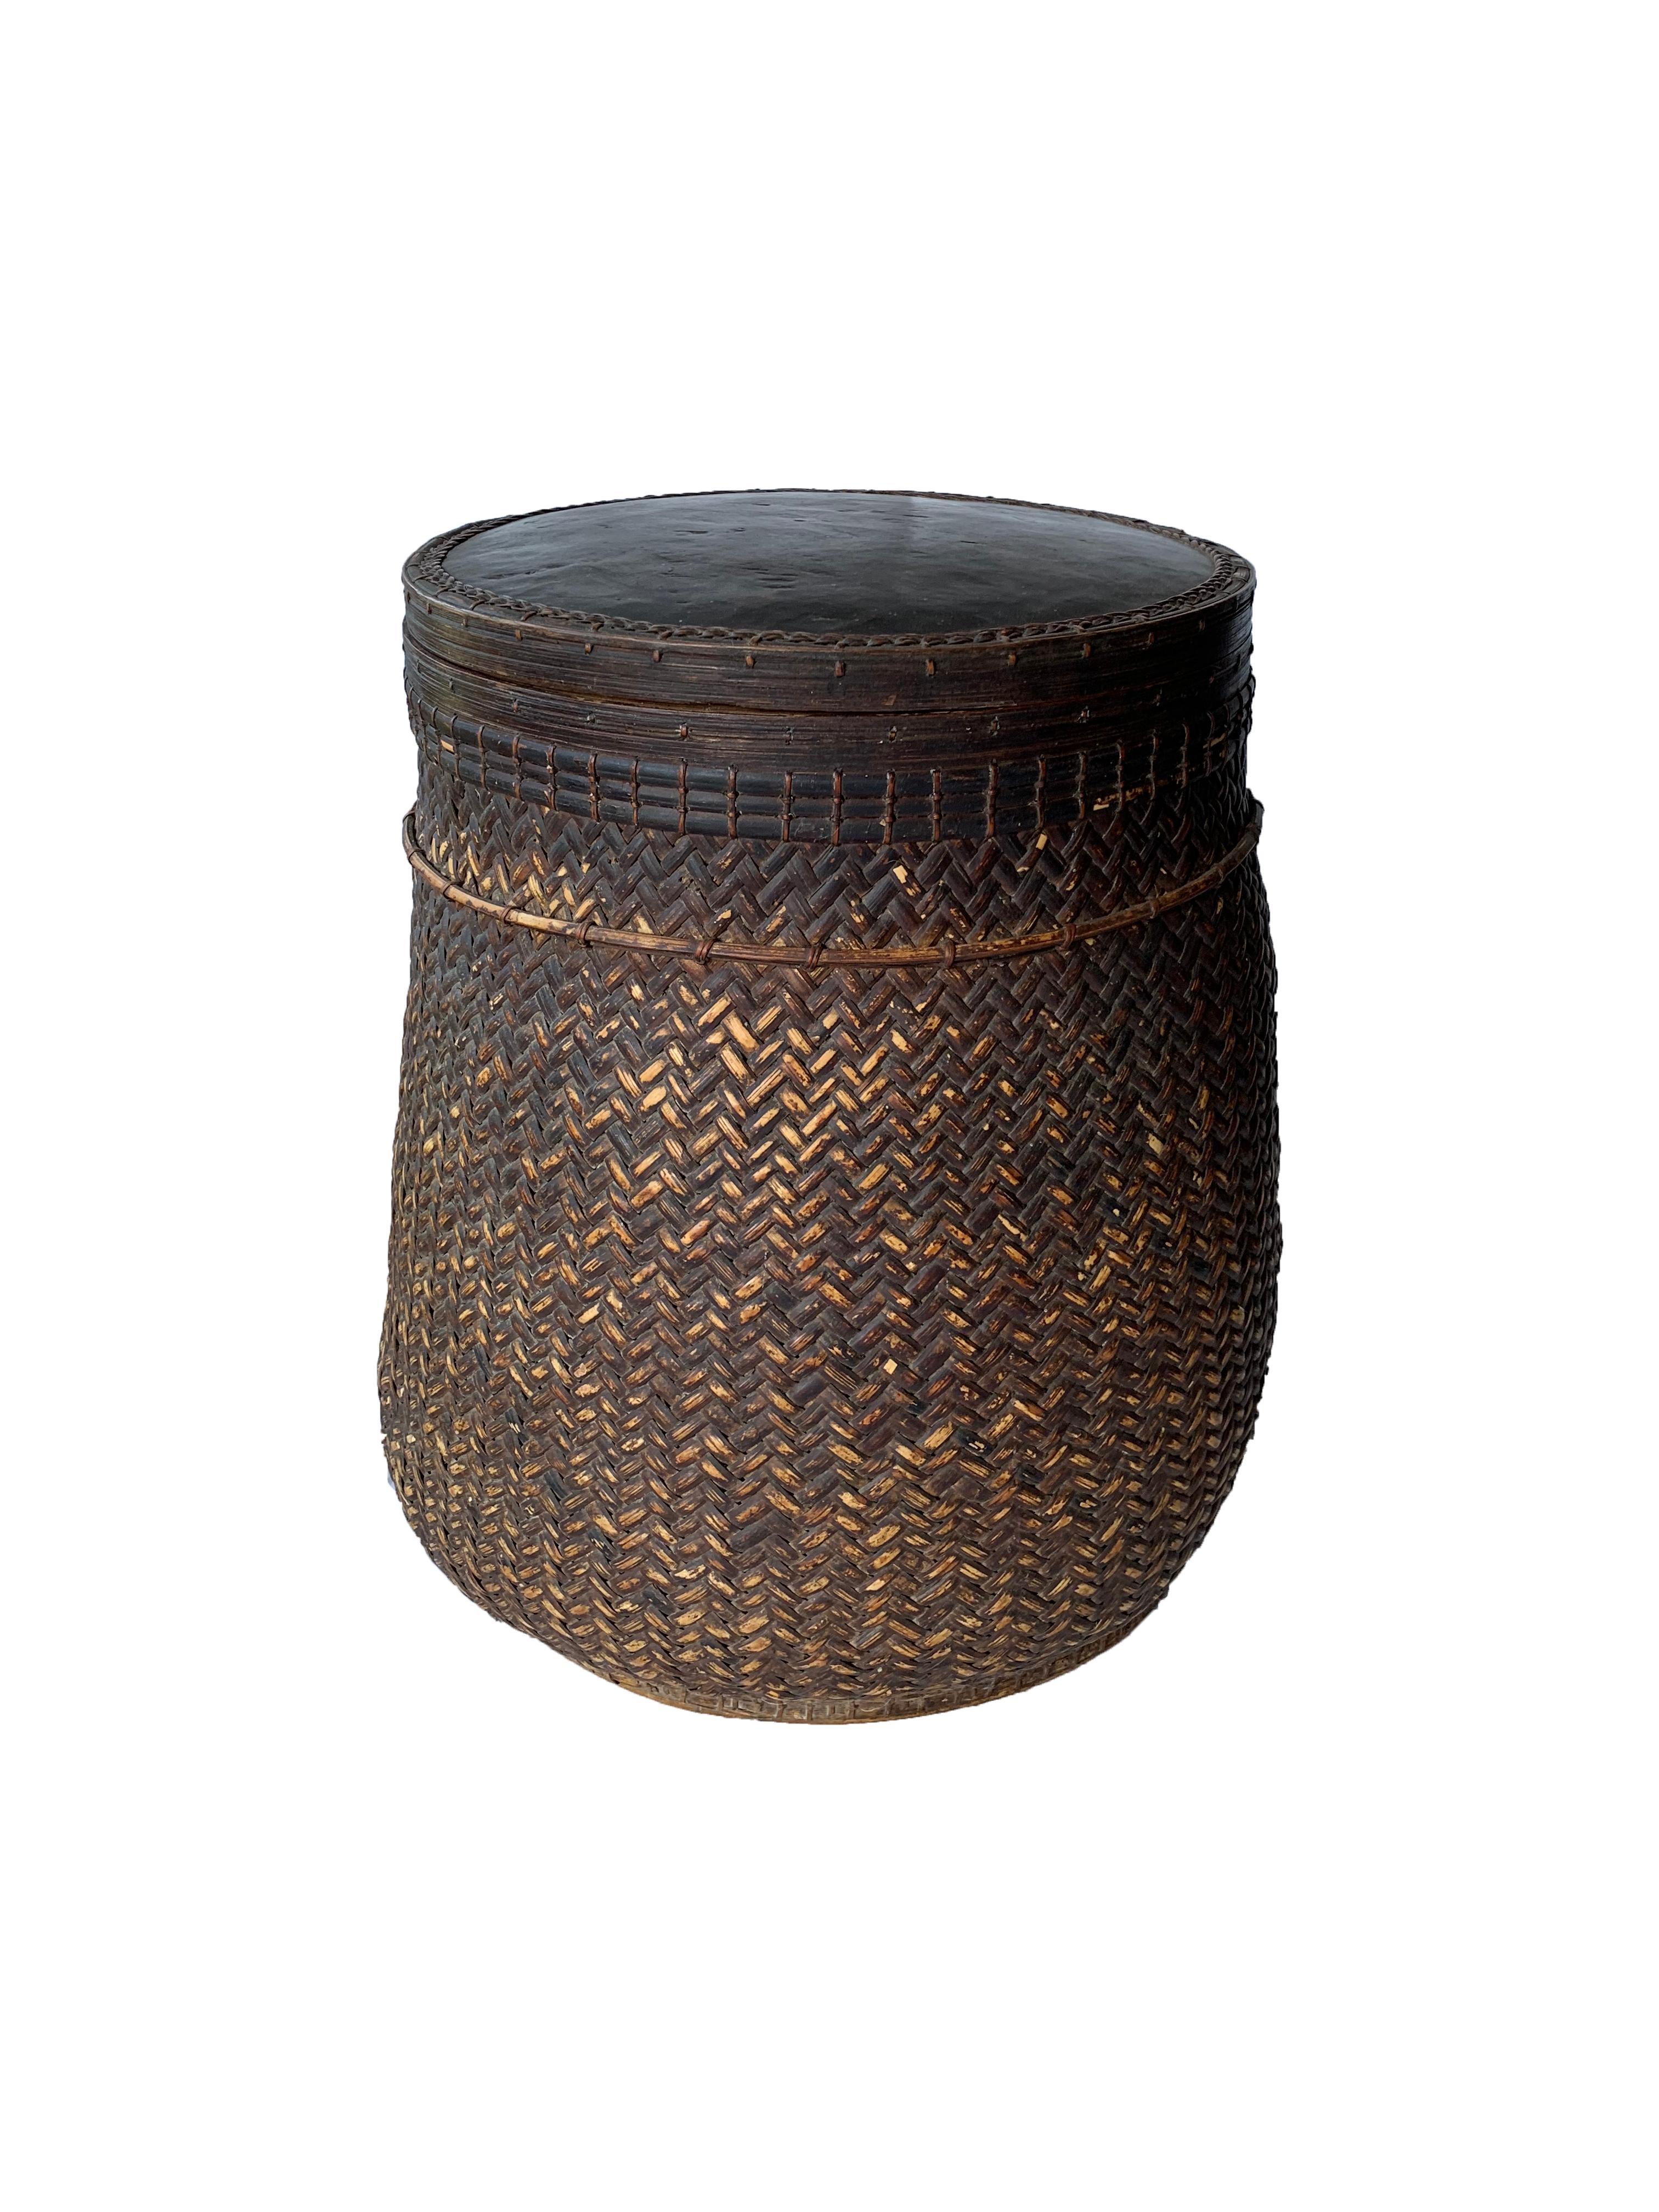 This mid-20th century hand-woven basket originates from the Dayak tribe of Borneo crafted with rattan fibres and an ironwood frame and rim. The hard top is also made from ironwood. These baskets were used to carry leaves, fruit, grain and wood and